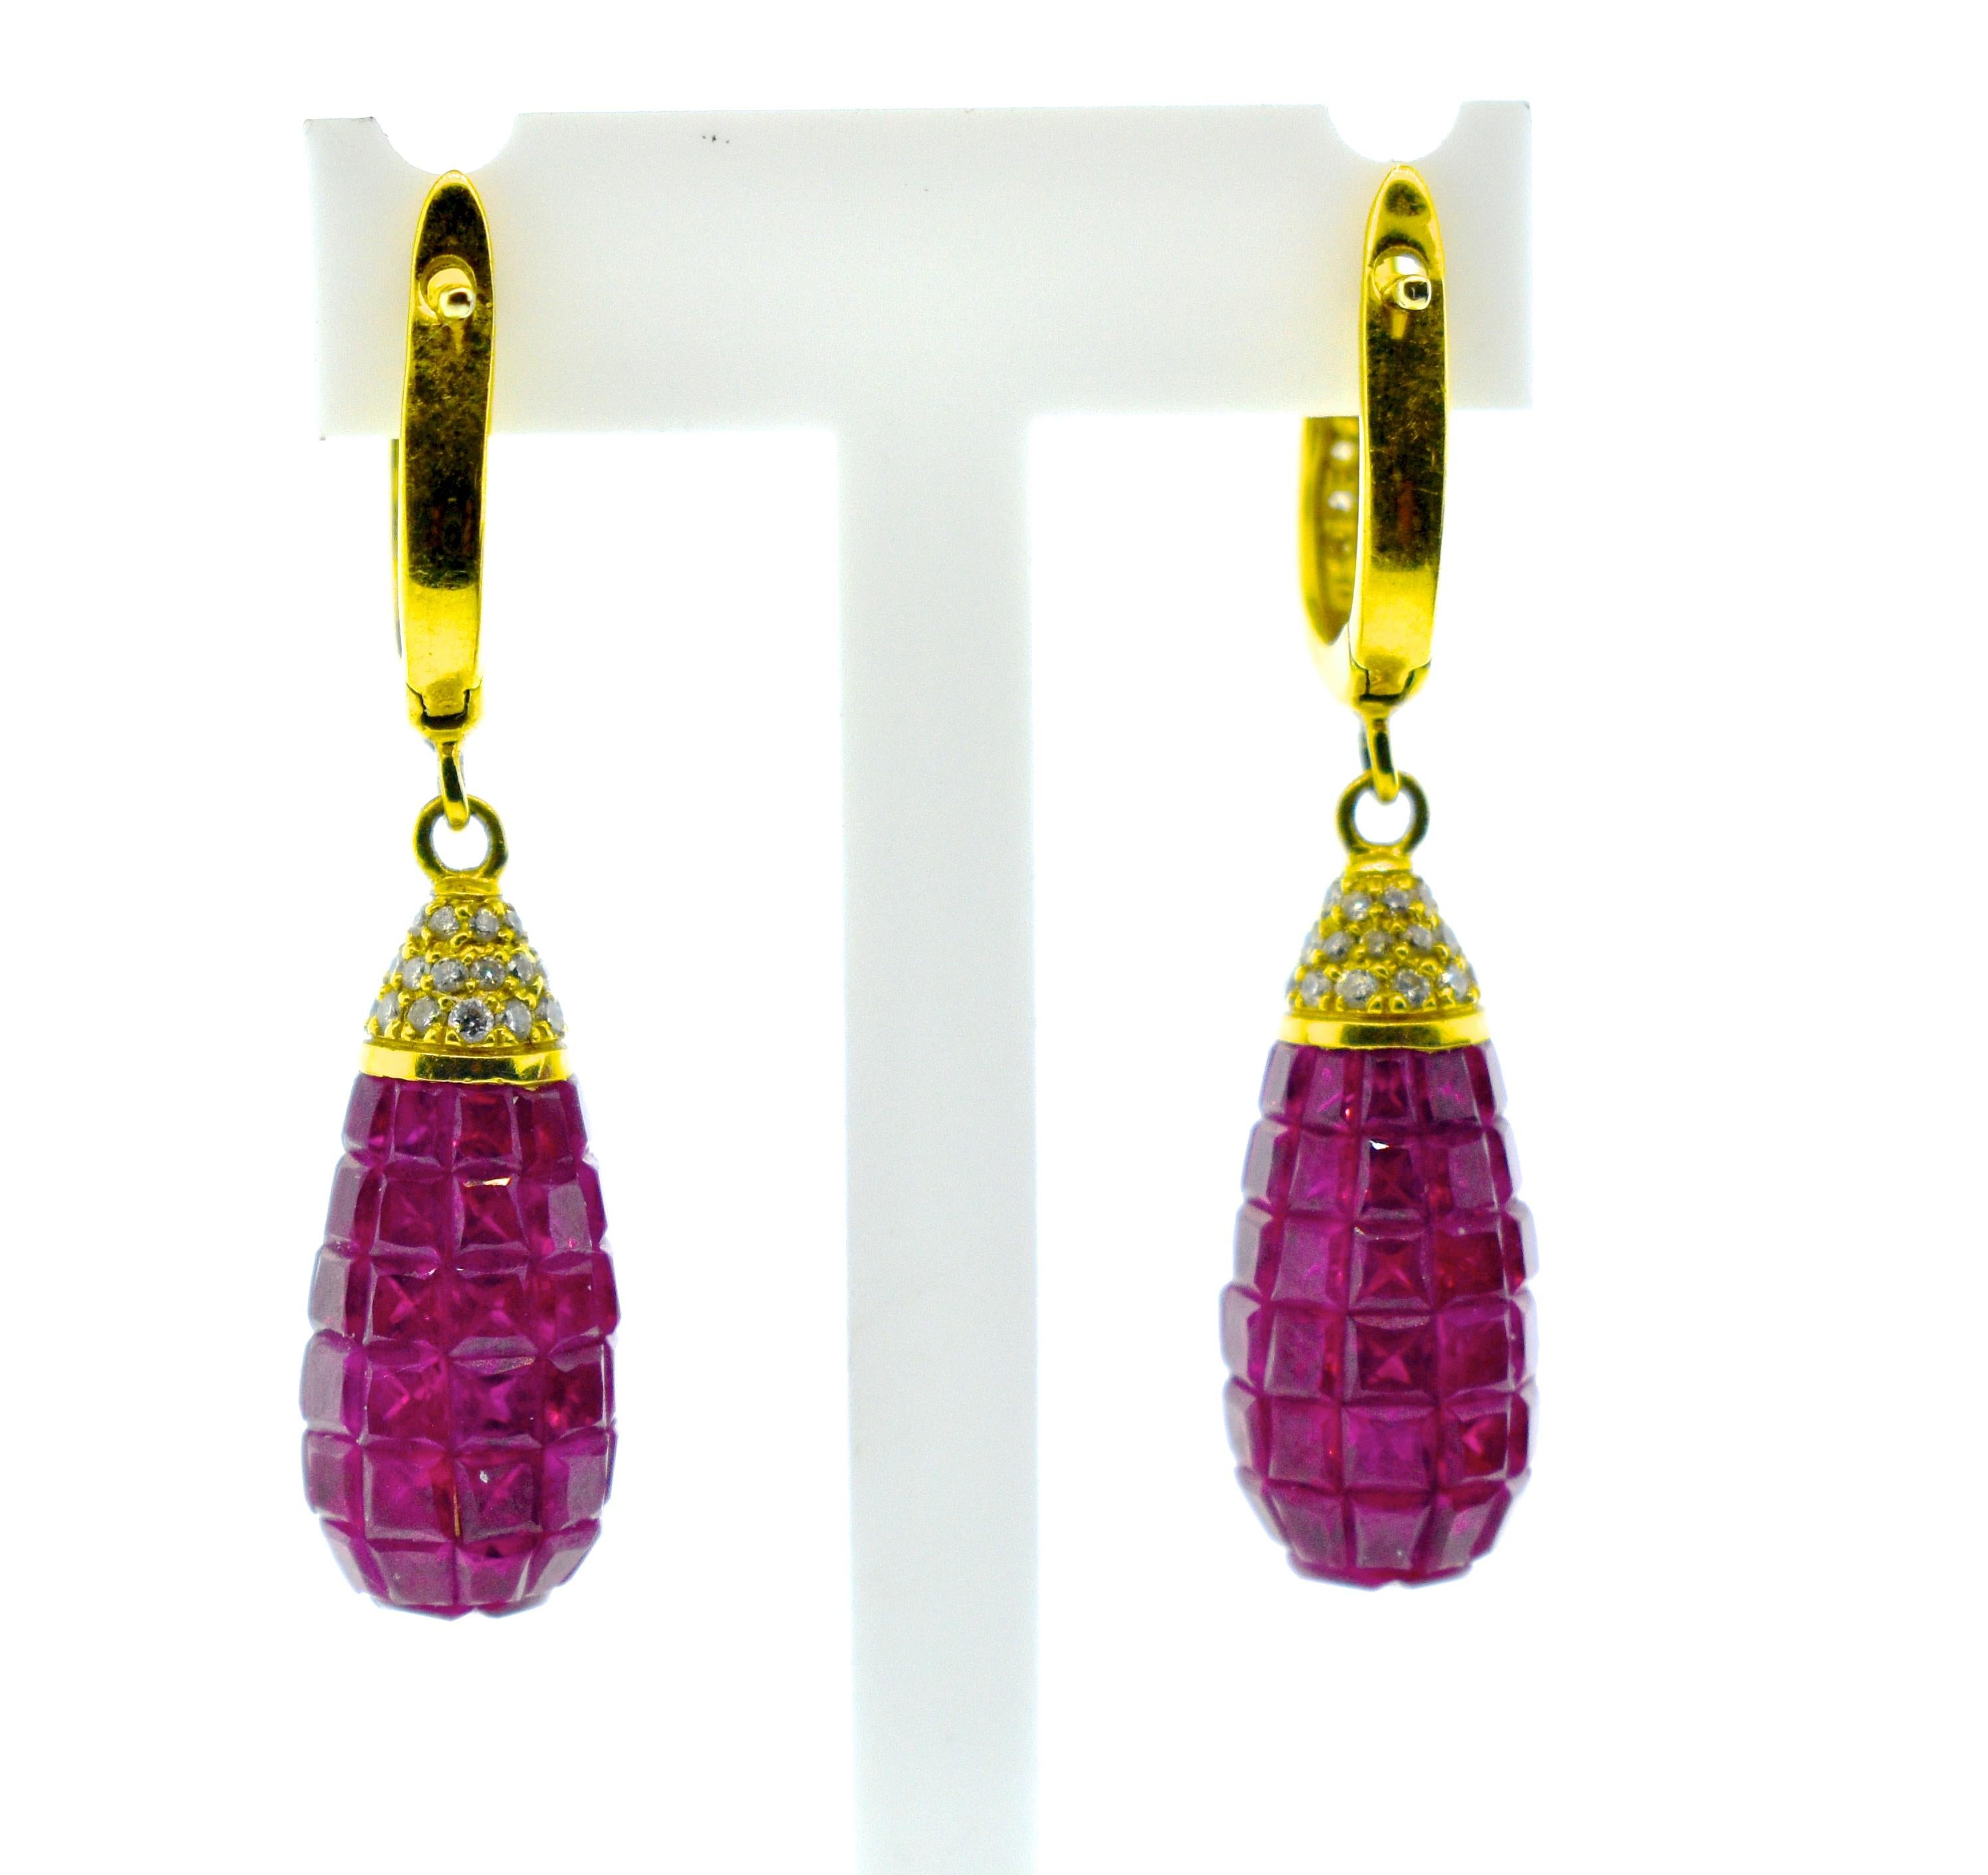 Contemporary Invisibly Set Natural Fine Rubies and Diamond Earrings